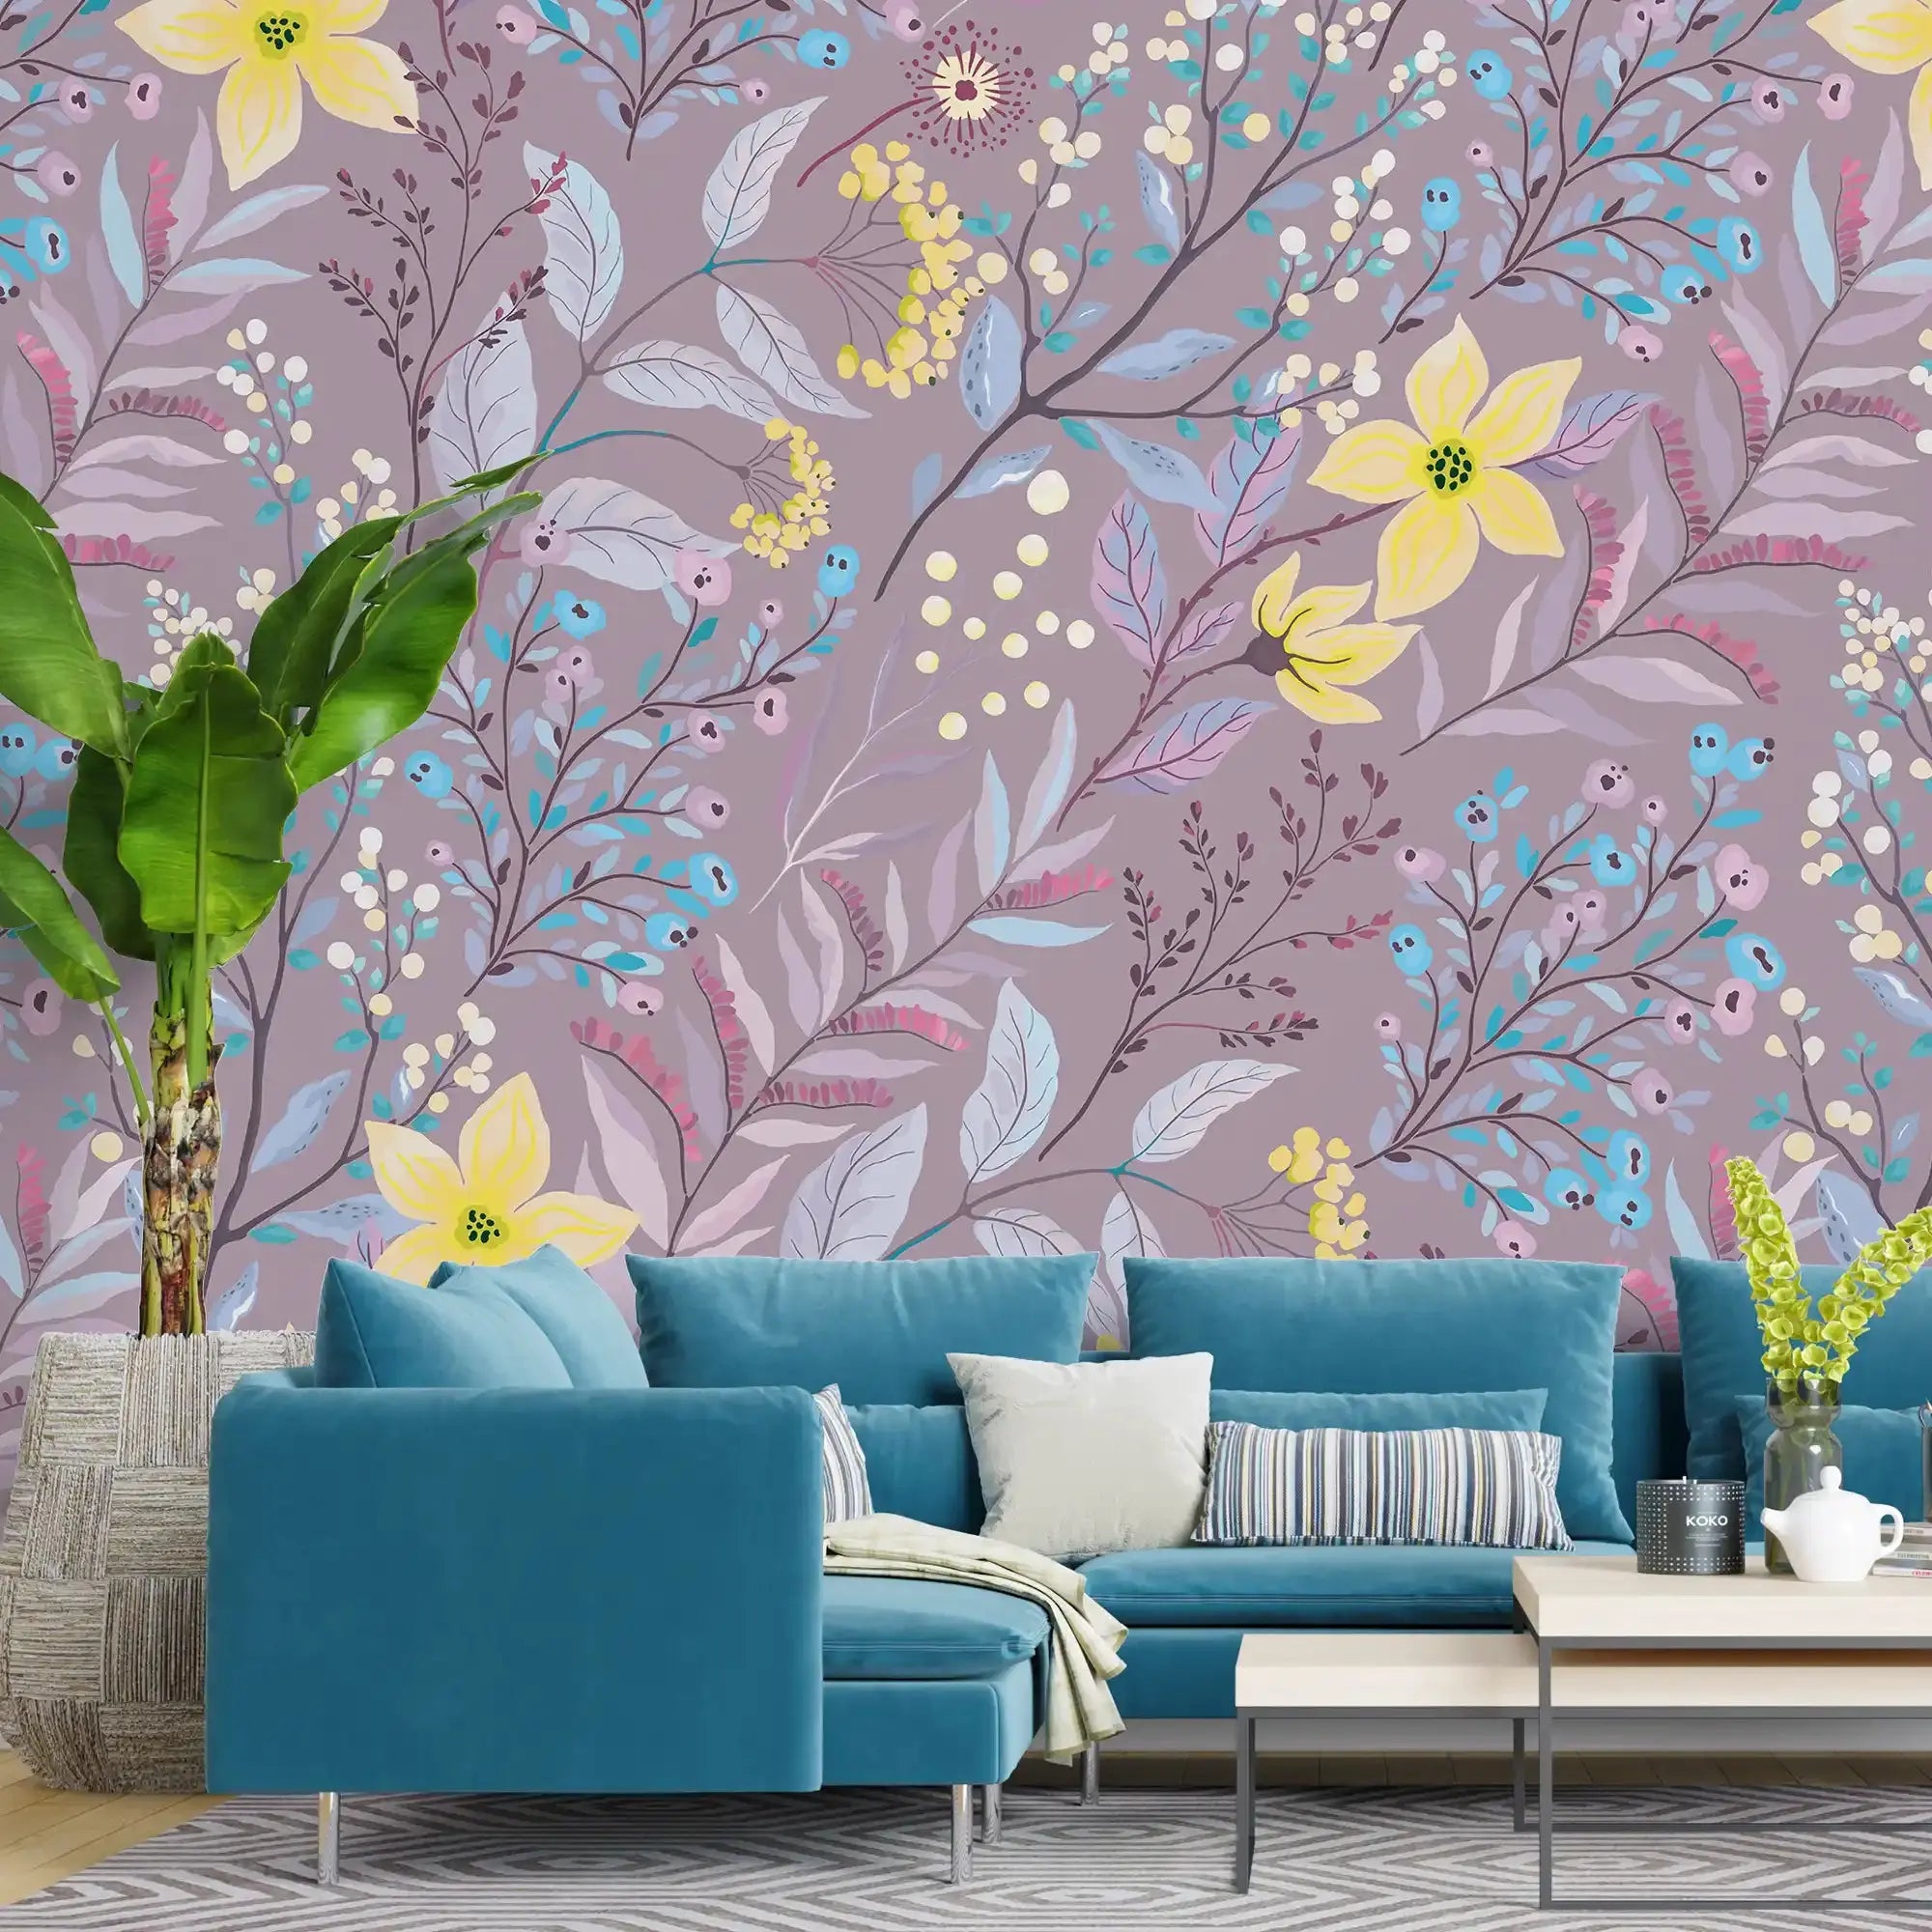 3105-D / Peel and Stick Floral Wallpaper: Pink Flowers and Leaf Design, Easy Apply Wall Decor for Bedroom & Bathroom - Artevella